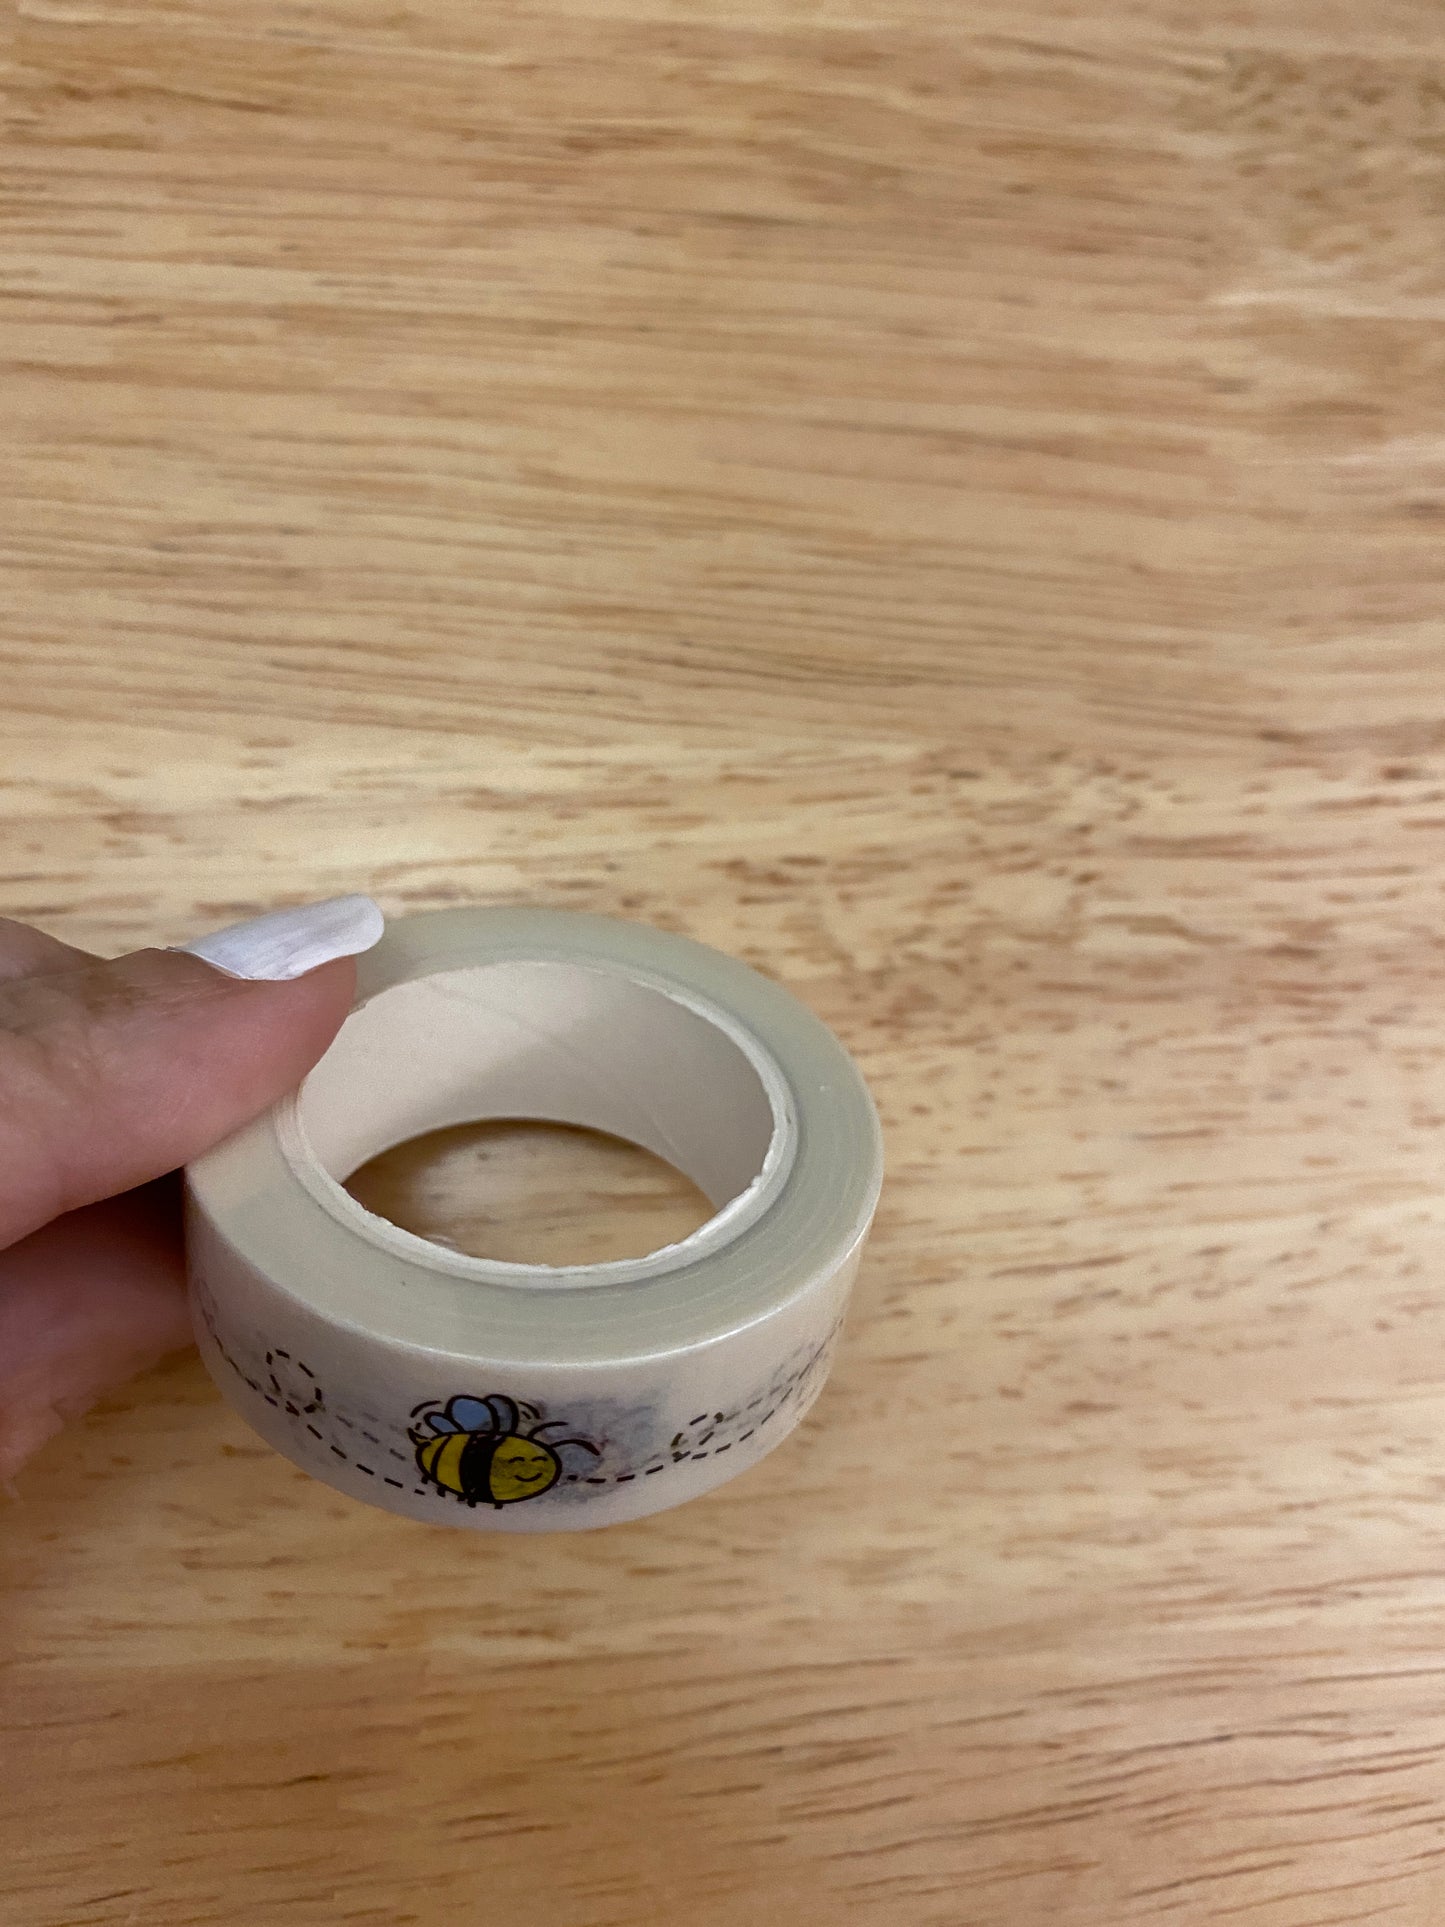 Big Roll of Bees Washi Tape